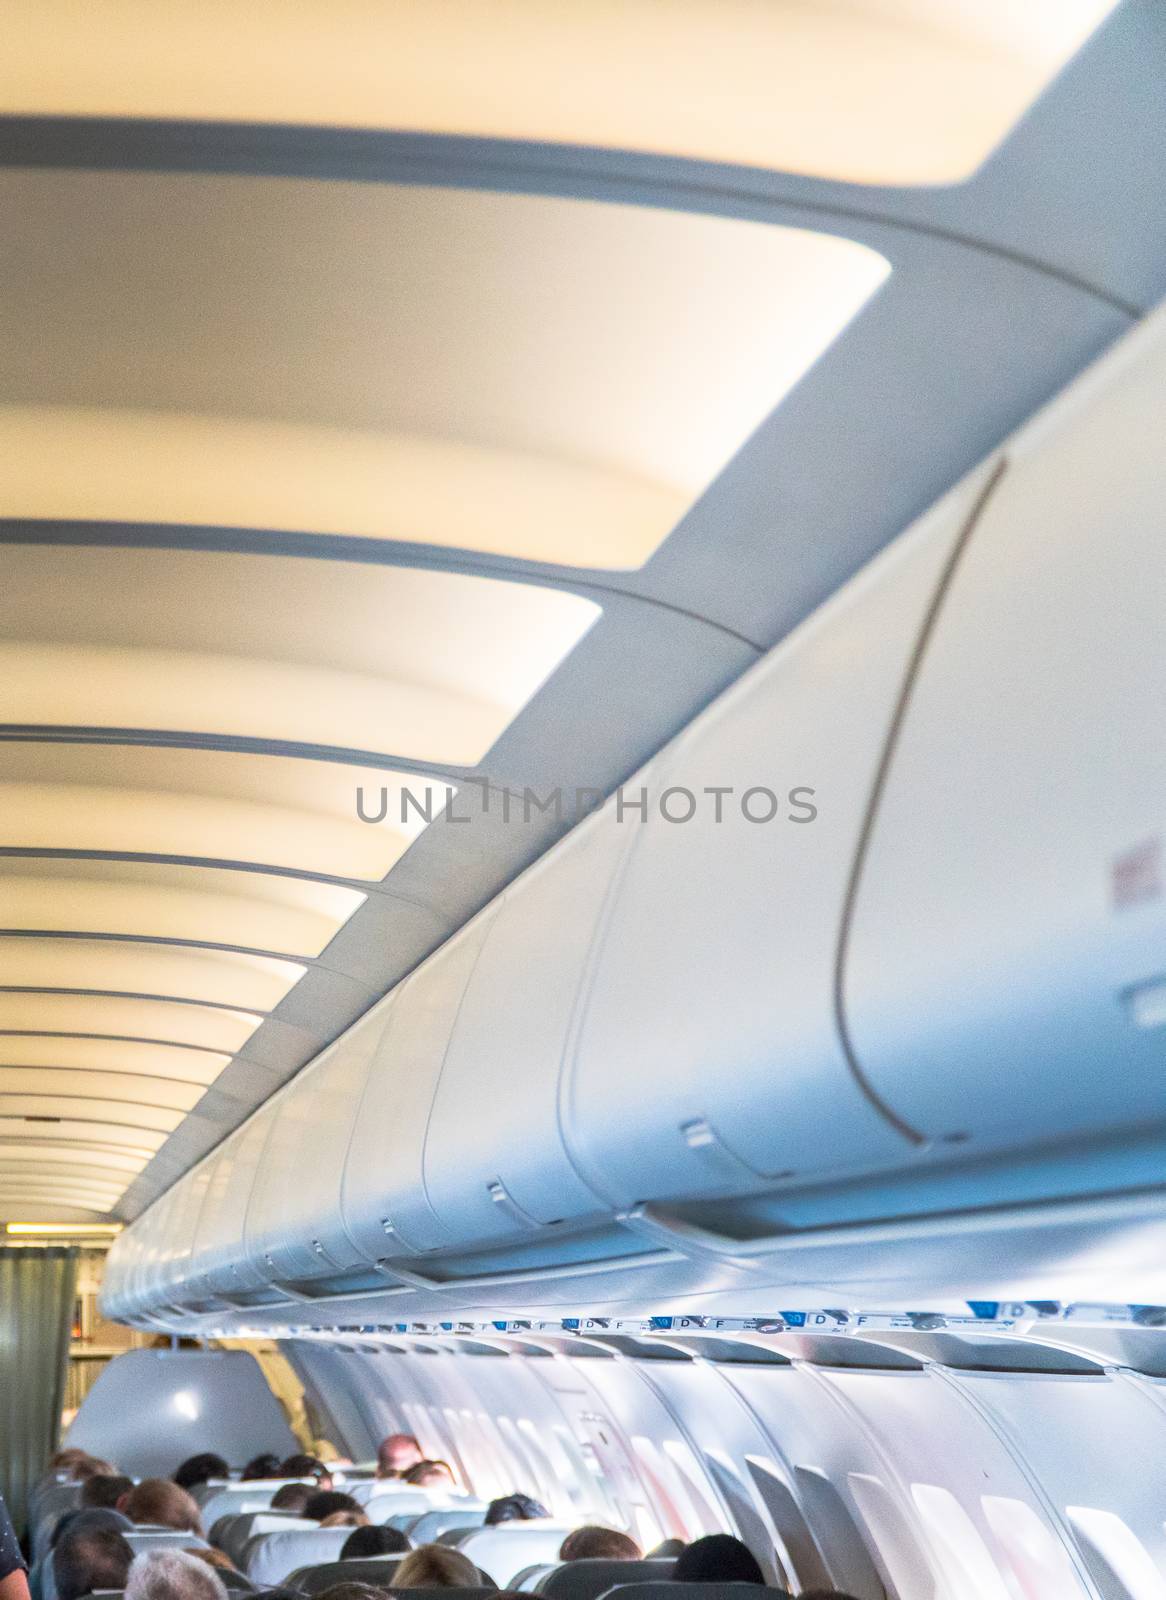 Blurred photo of the aircraft interior. The ceiling of the airplane with luggage compartment